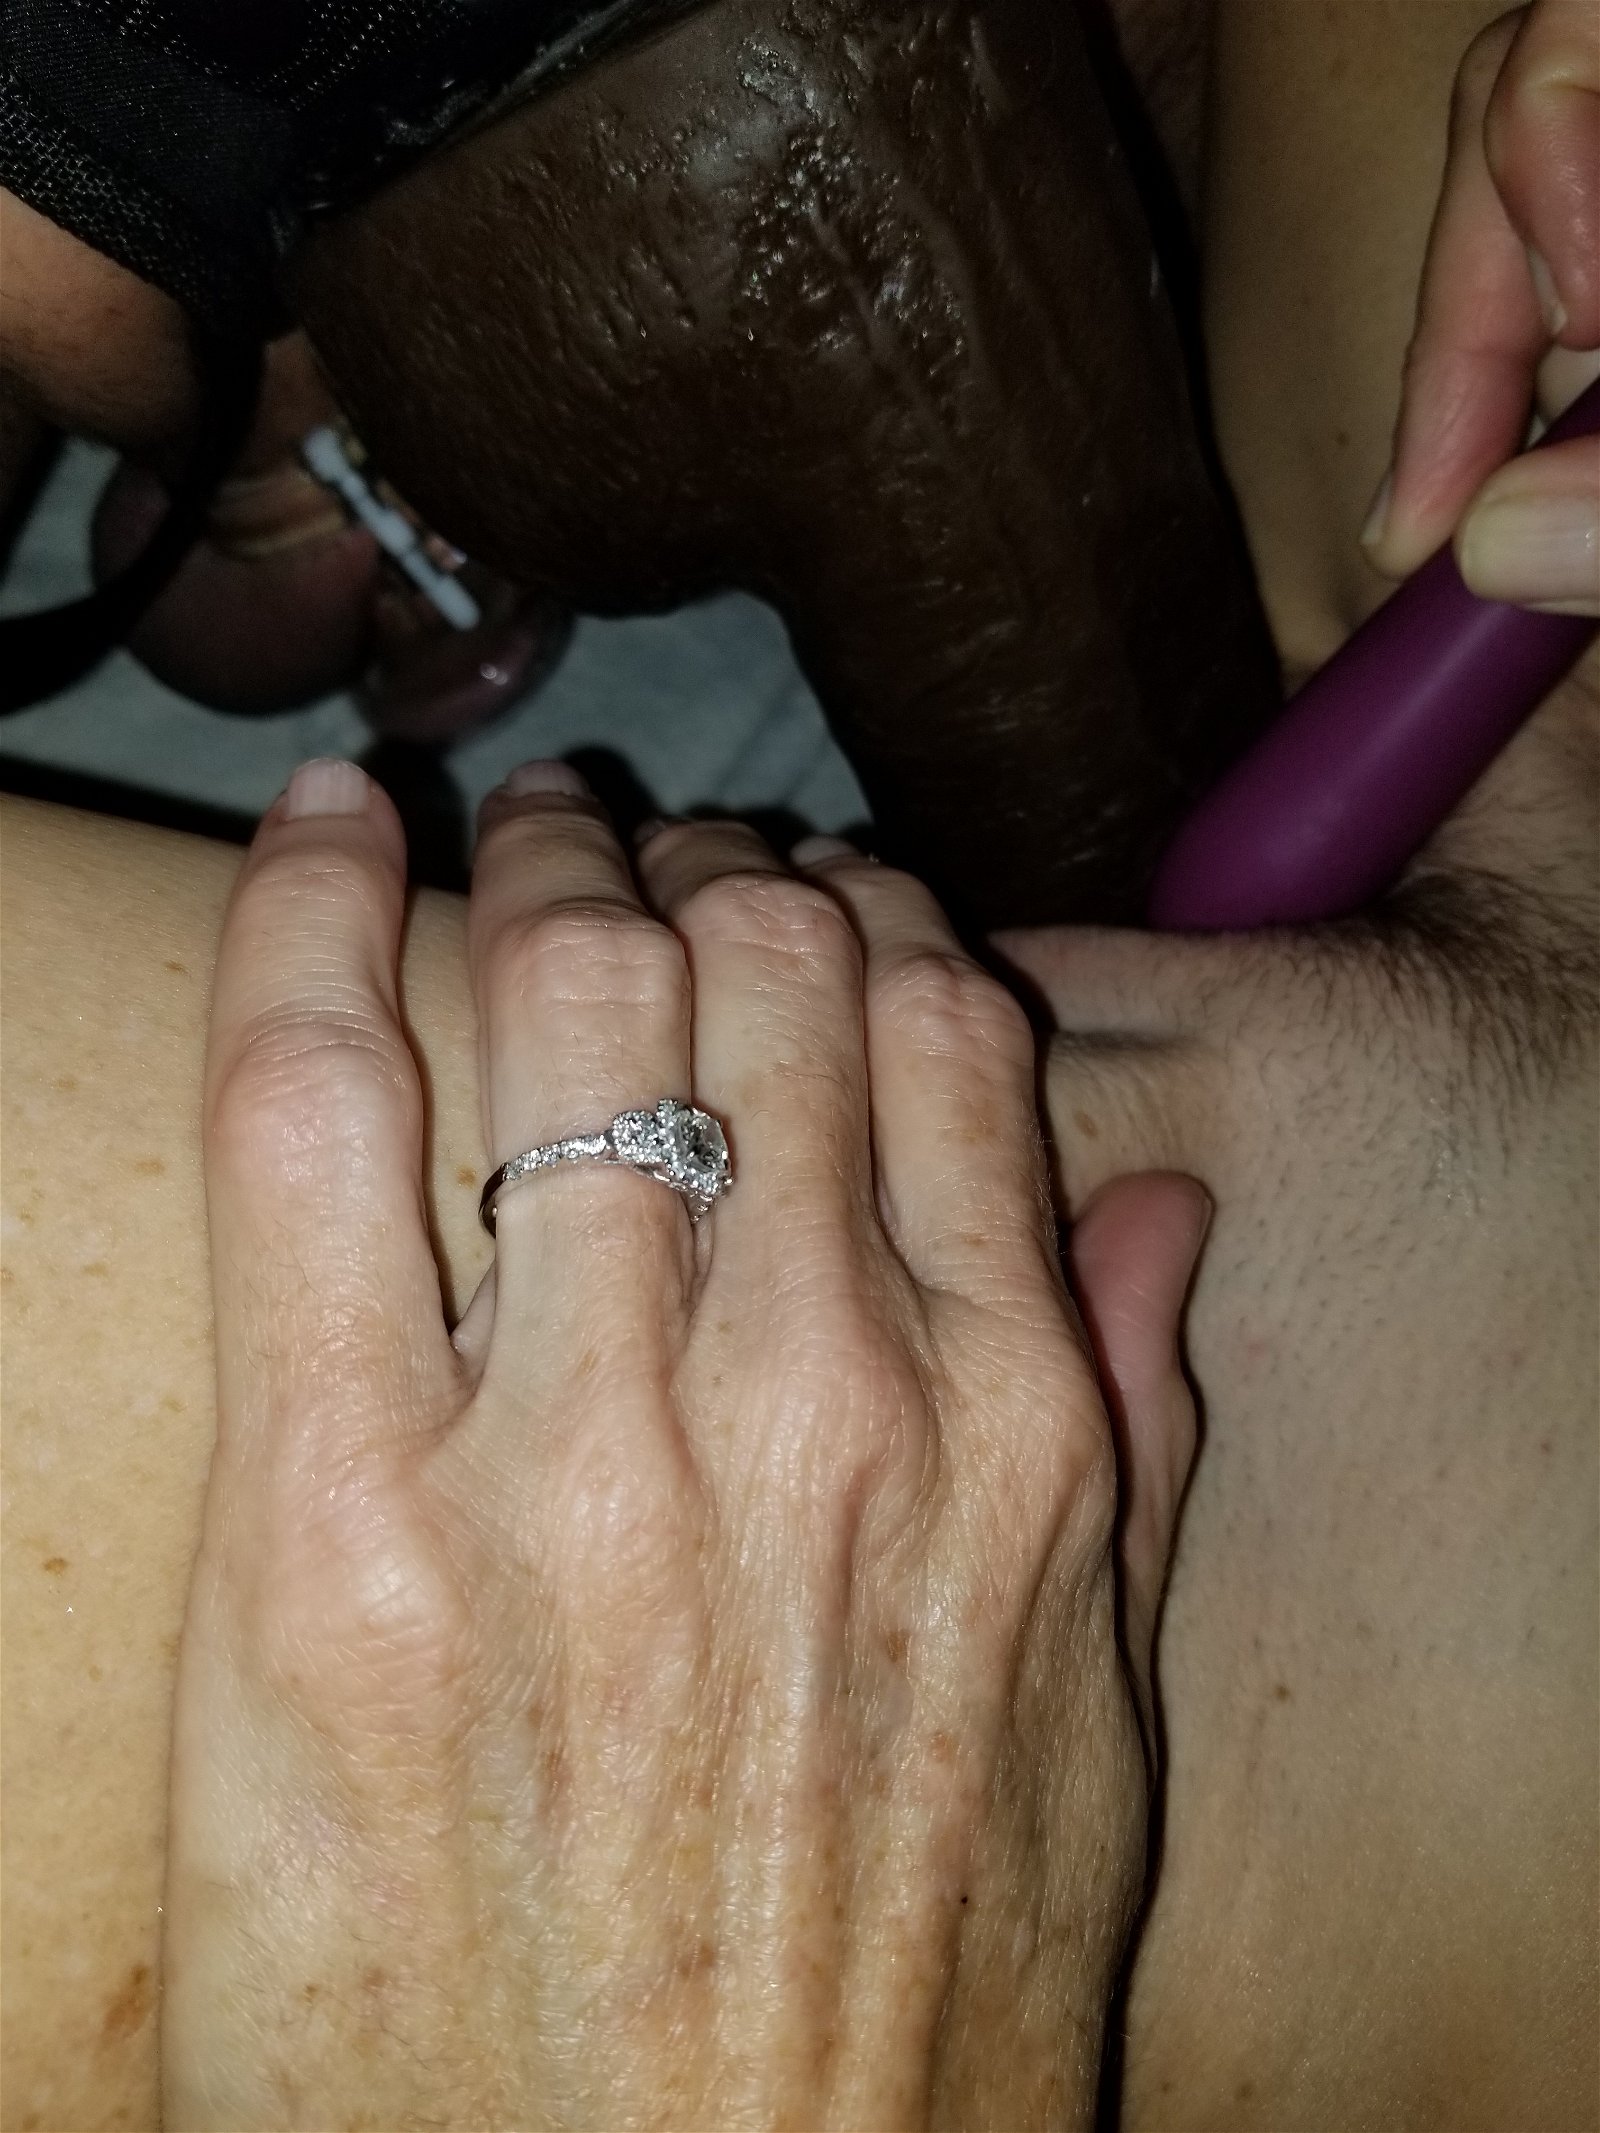 Photo by goddesskatandherpet with the username @goddesskatandherpet,  February 17, 2020 at 9:06 AM. The post is about the topic Male Chastity and the text says 'Her Pet: Goddess Kat get fucked by our Bam strapon while i am caged'